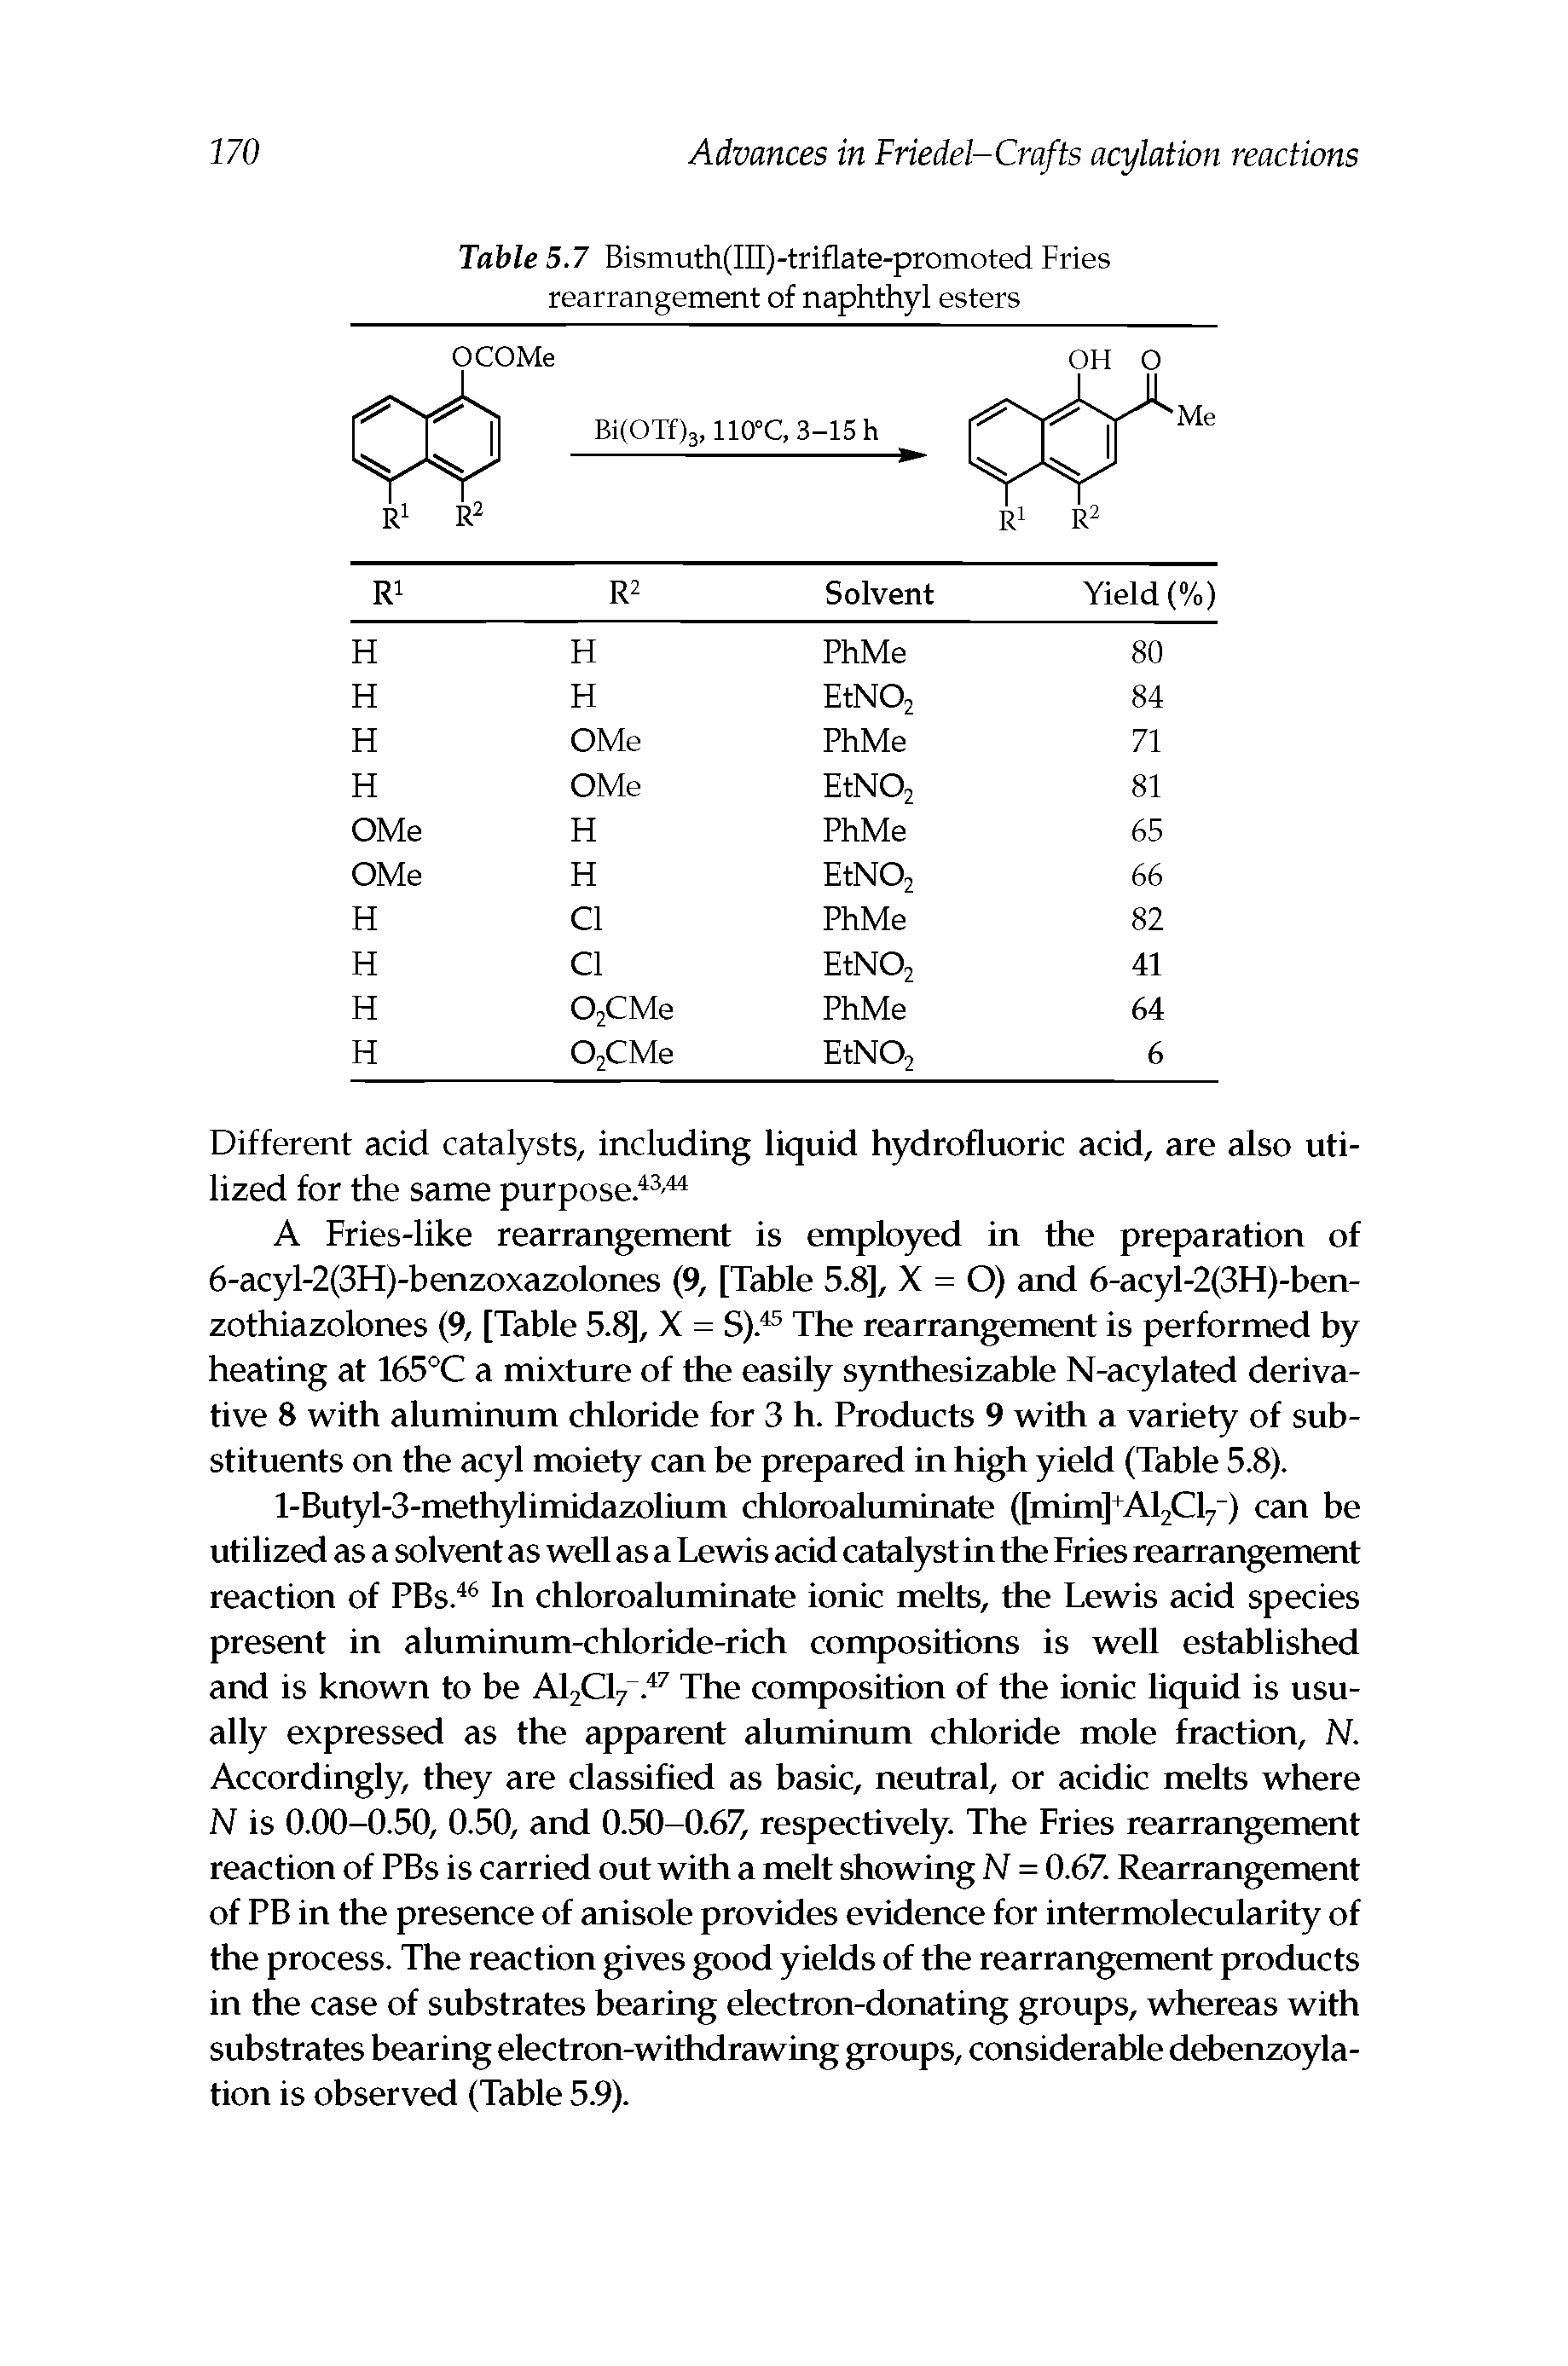 Table 5.7 Bismuth(III)-triflate-promoted Fries rearrangement of naphthyl esters...